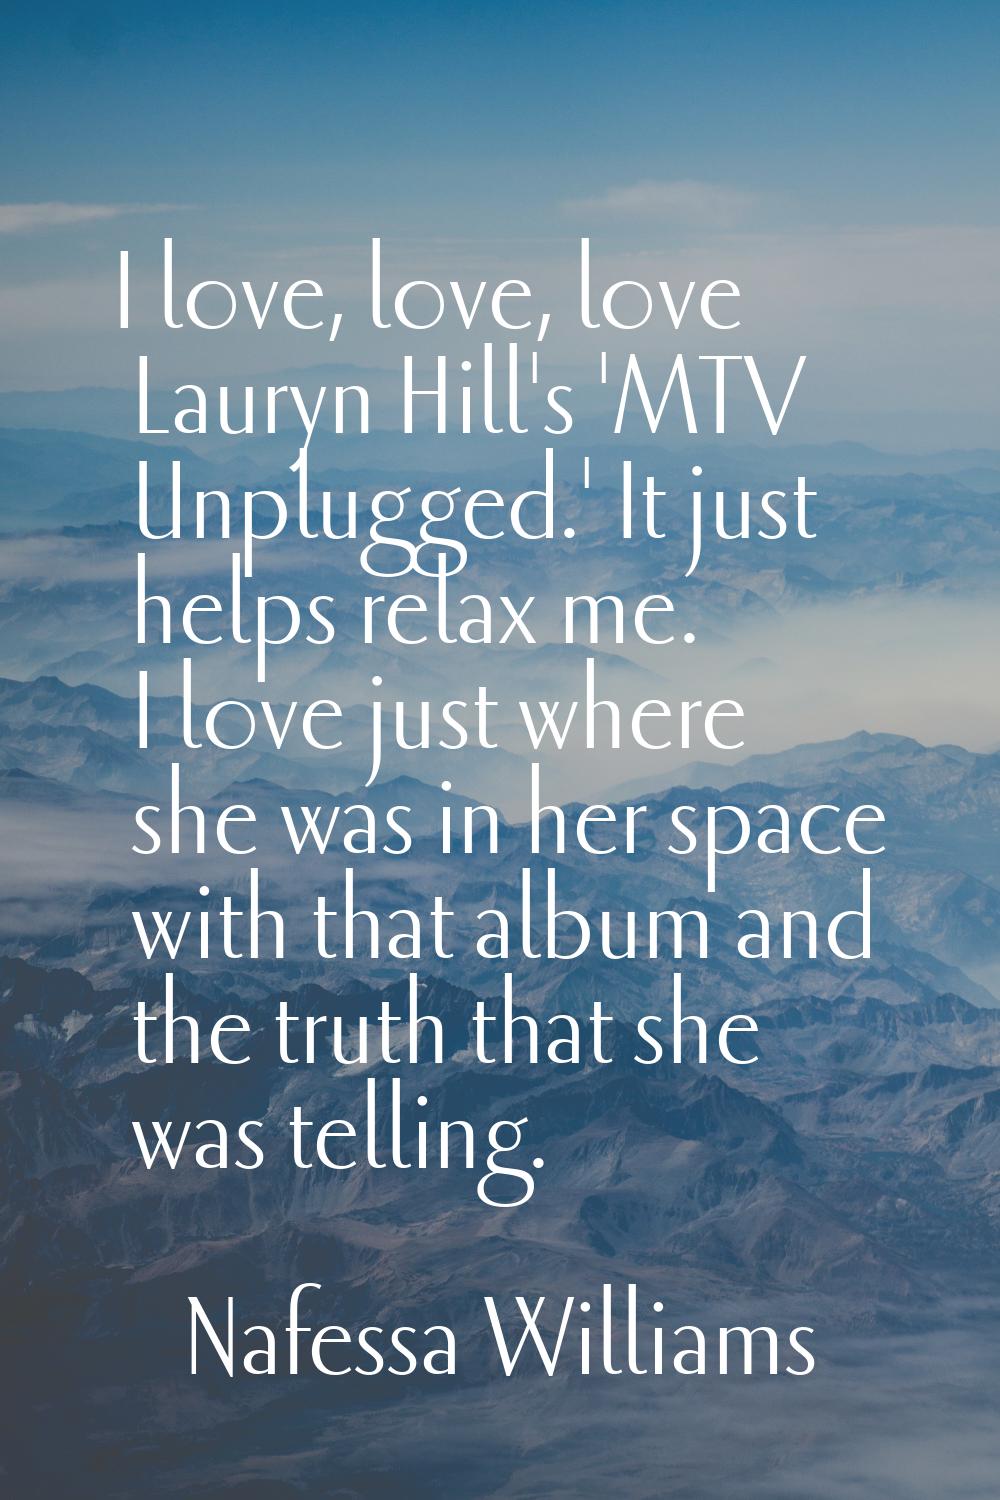 I love, love, love Lauryn Hill's 'MTV Unplugged.' It just helps relax me. I love just where she was